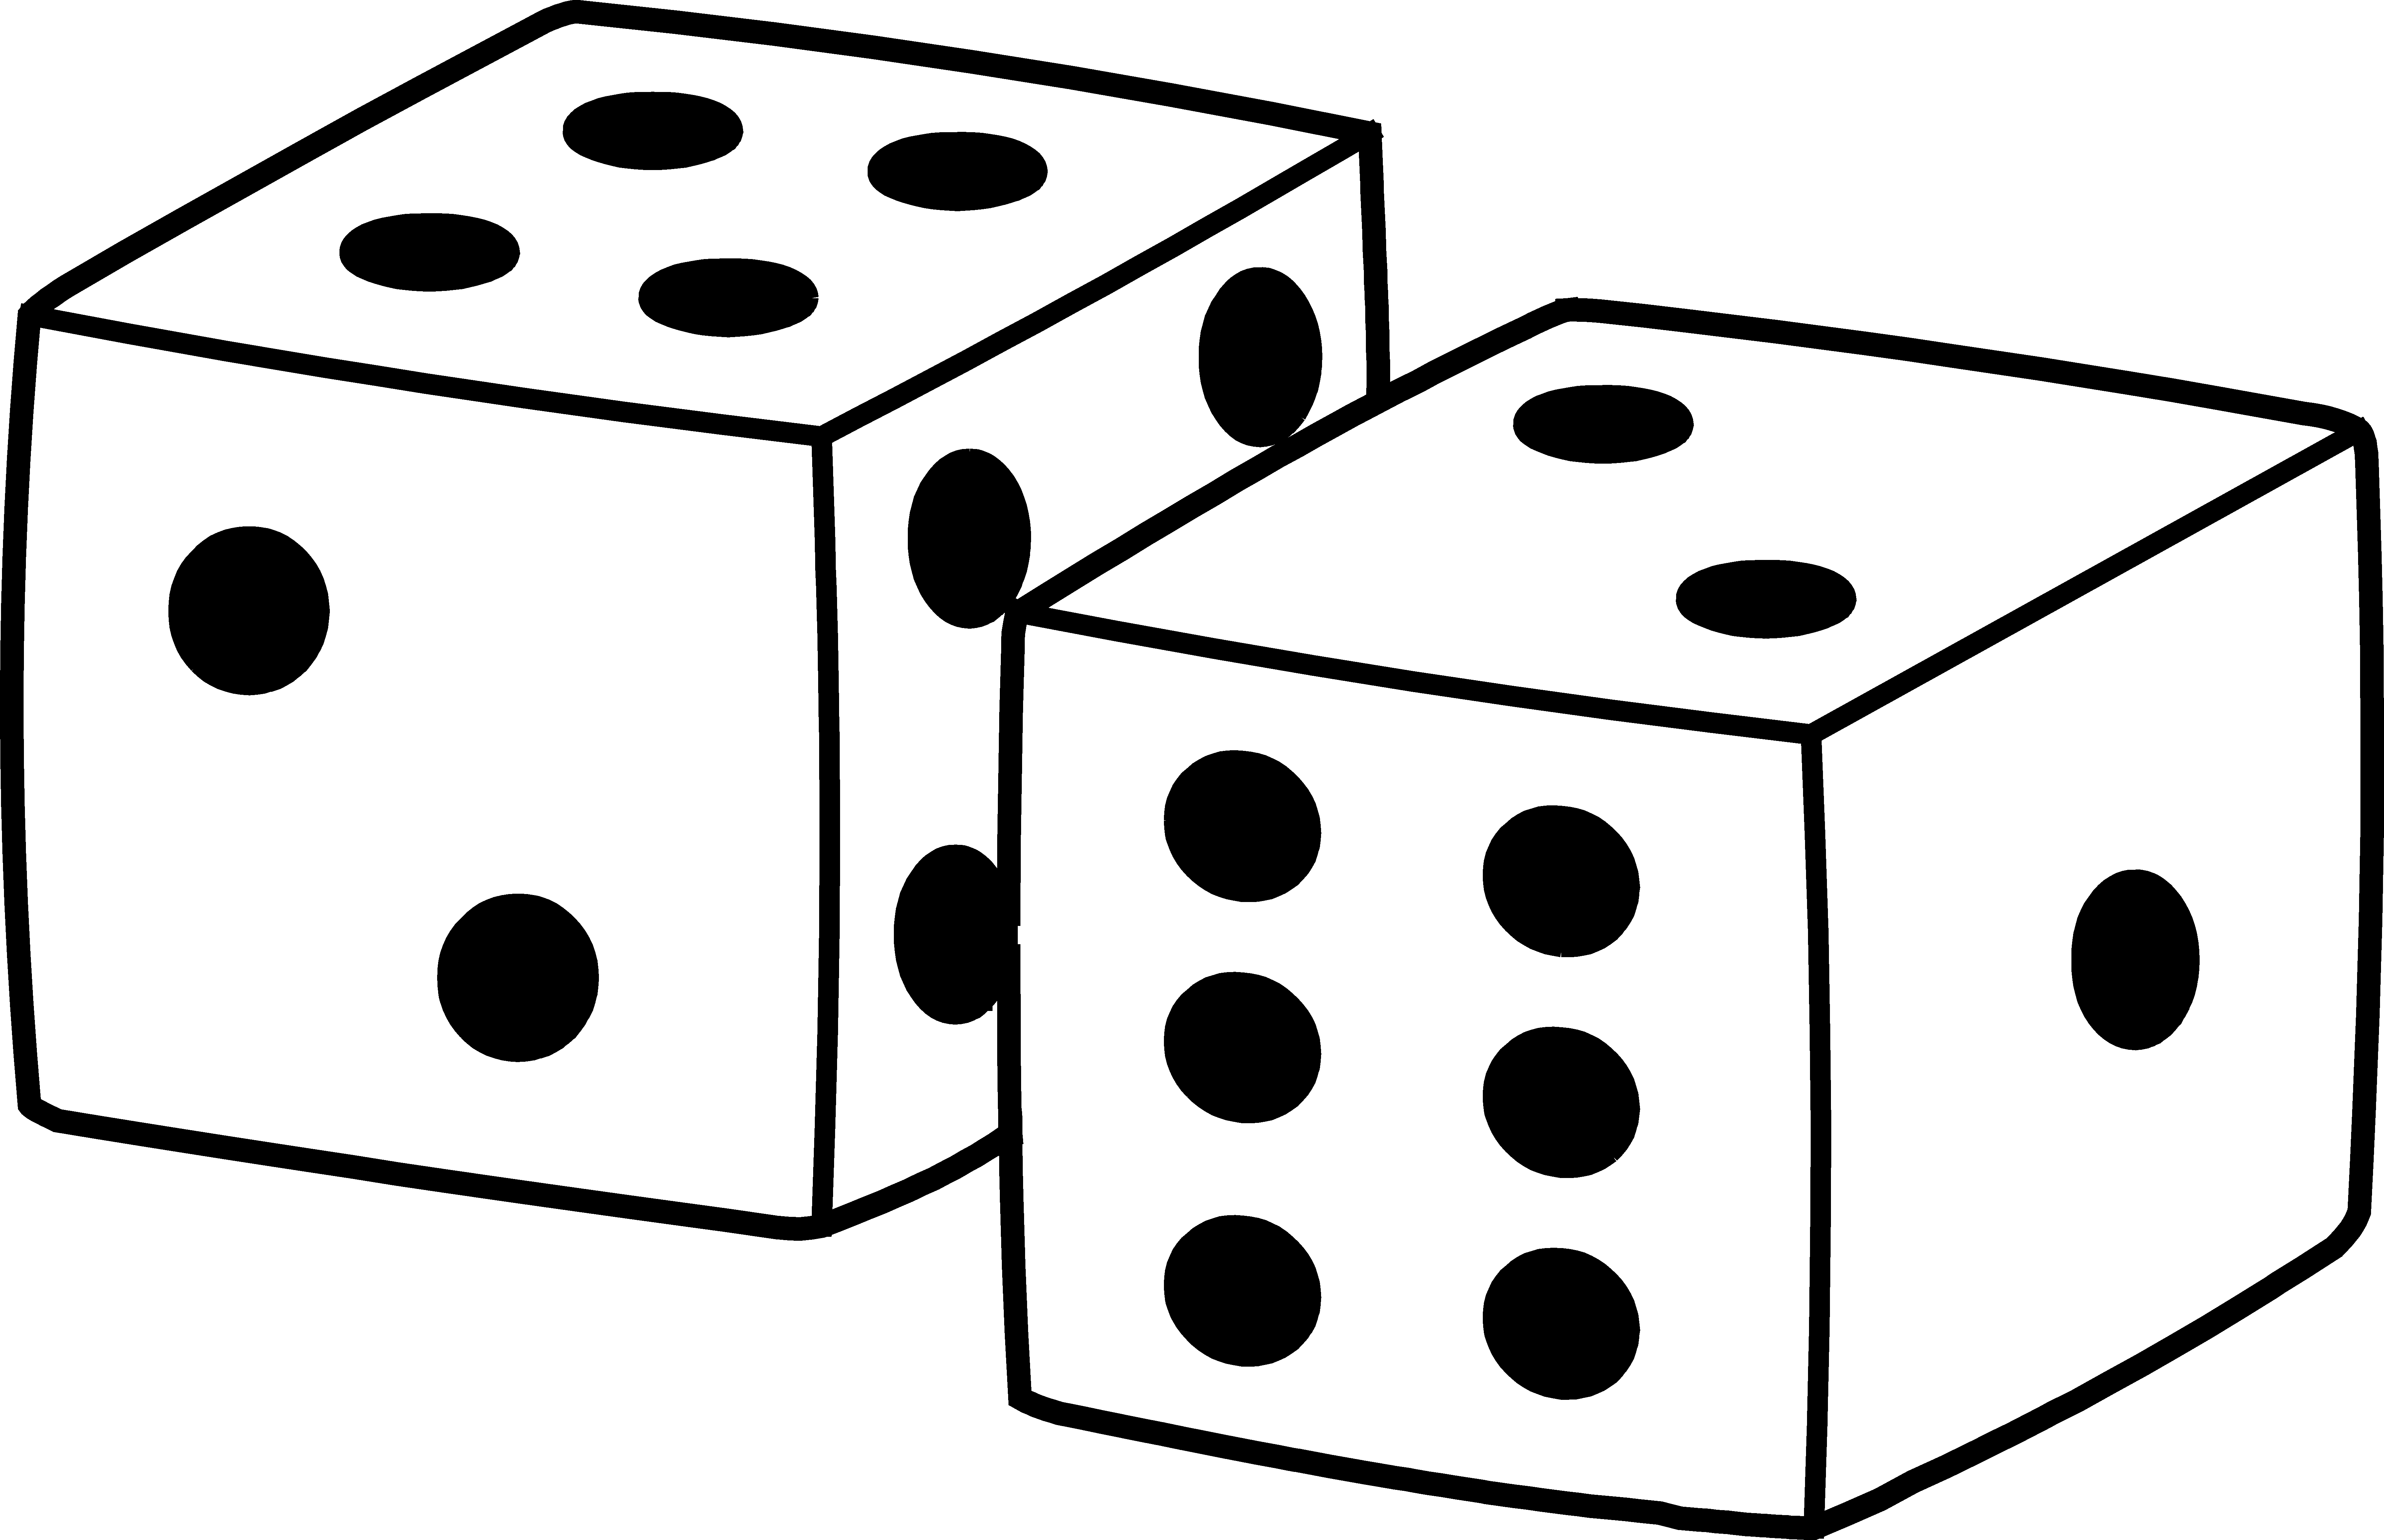 Images Of Dice Free Download Clip art of Dice Clipart #4309.